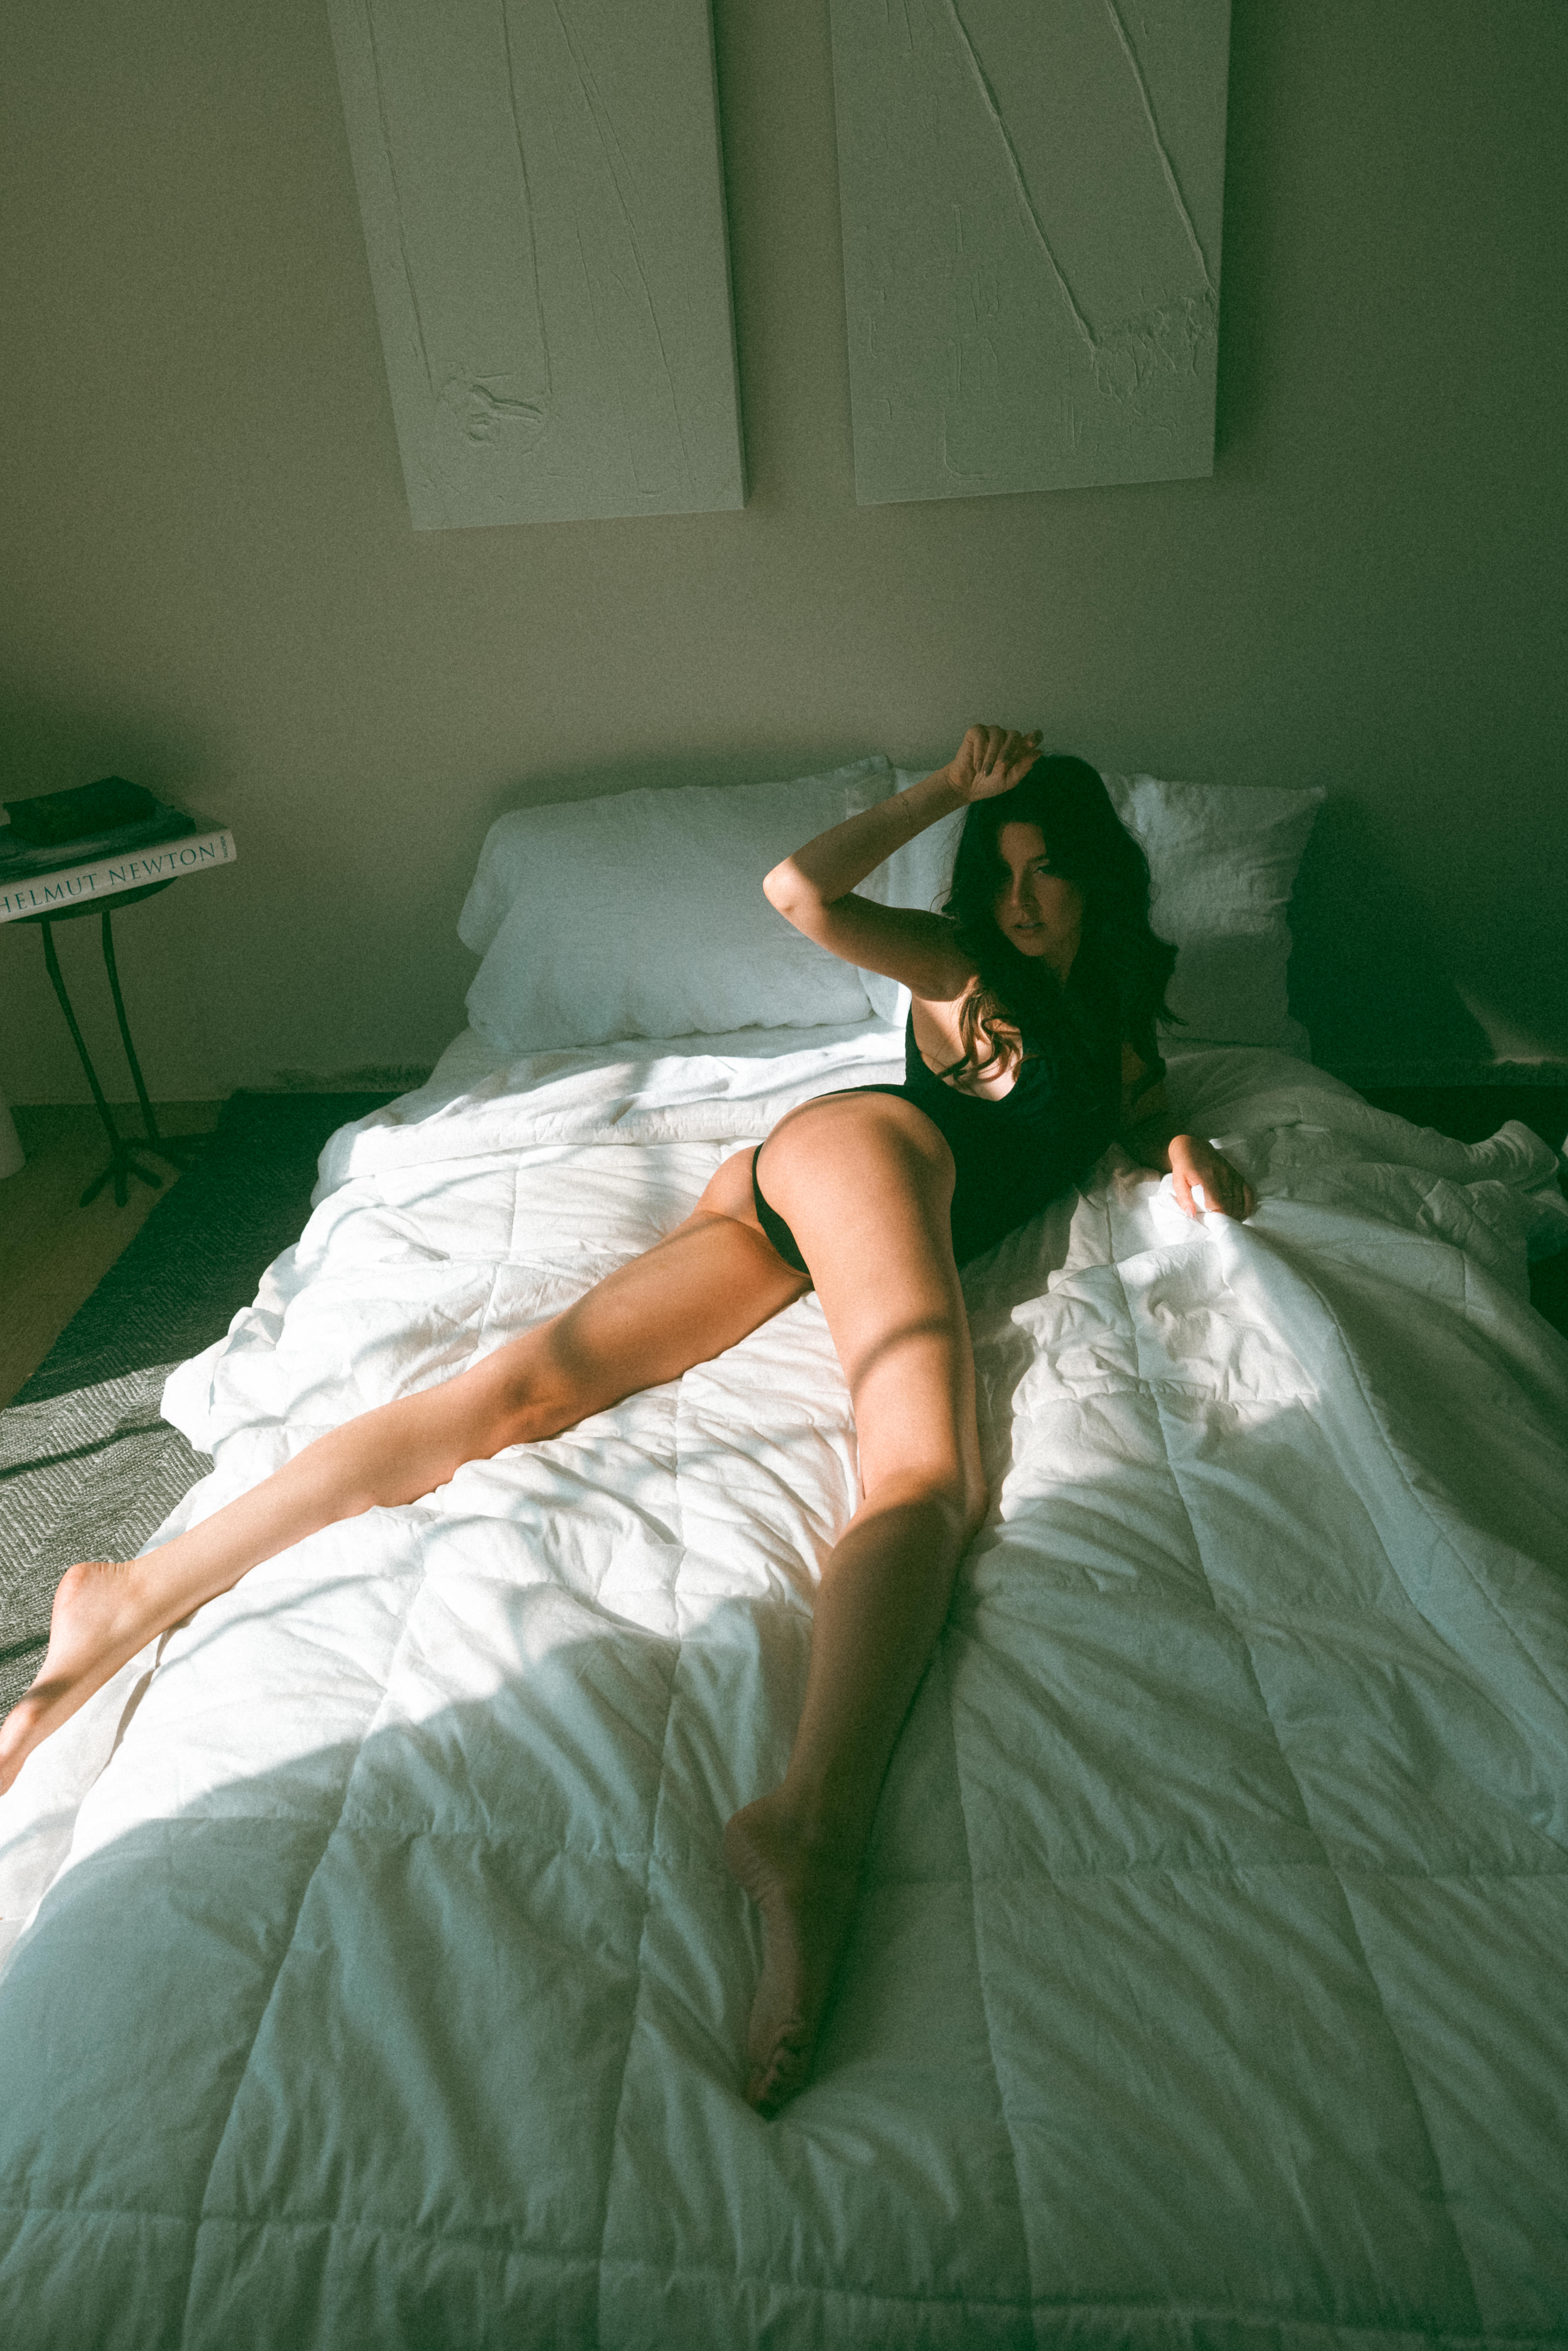 a woman laying on her stomach twisting her top half around while light shines onto her through the window